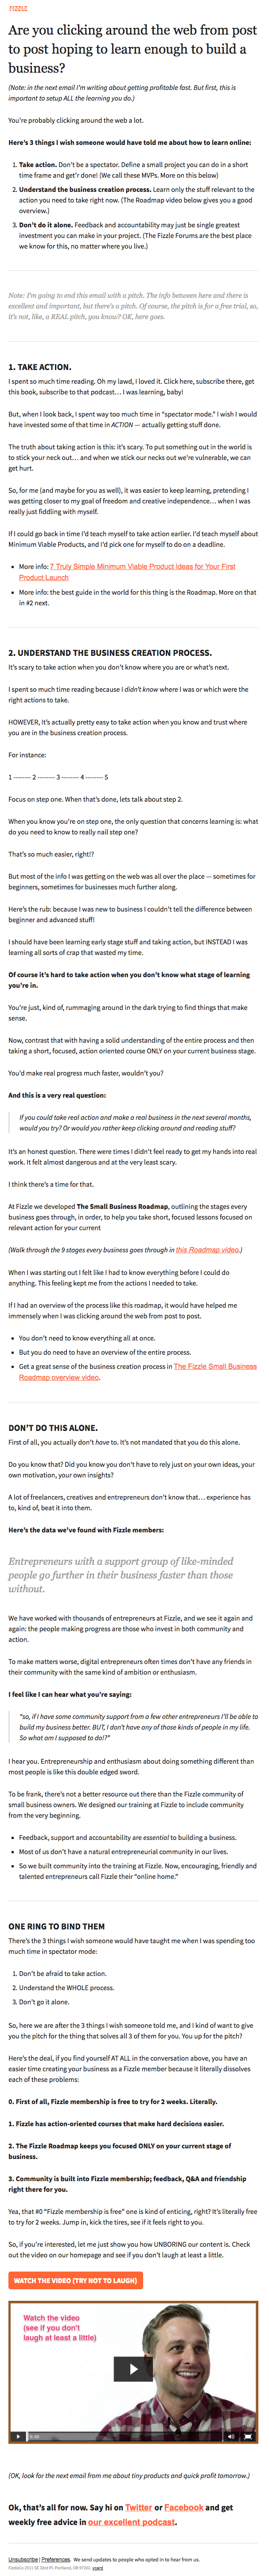 Email newsletter example design with entrepreneurship tips by Fizzle